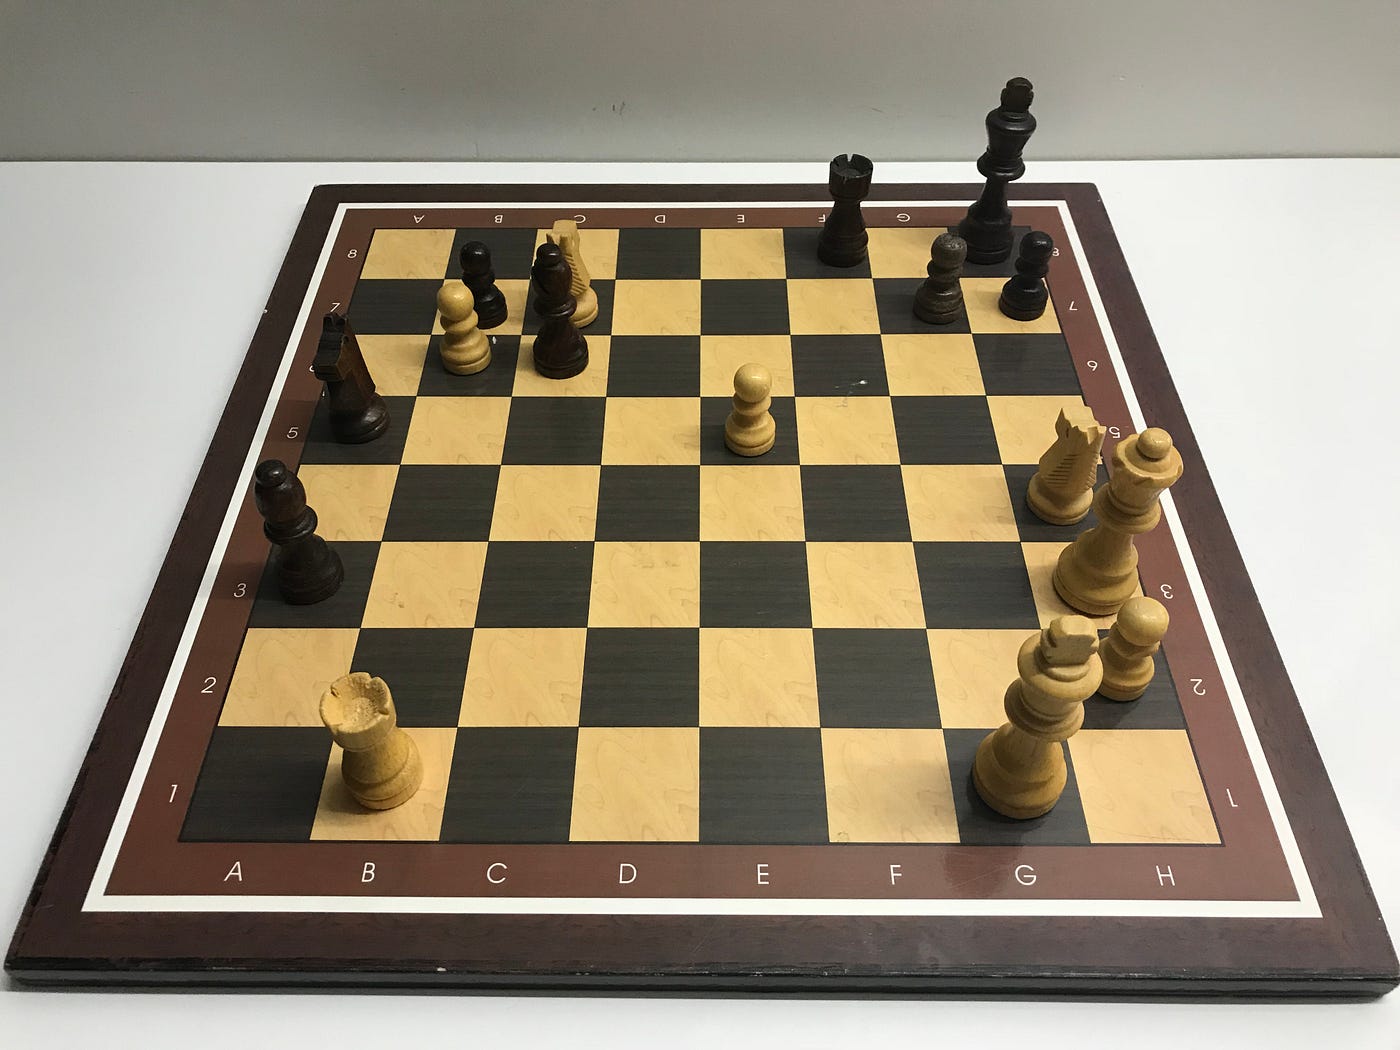 At CES 2019, a magical Harry Potter chessboard comes to life - CNET